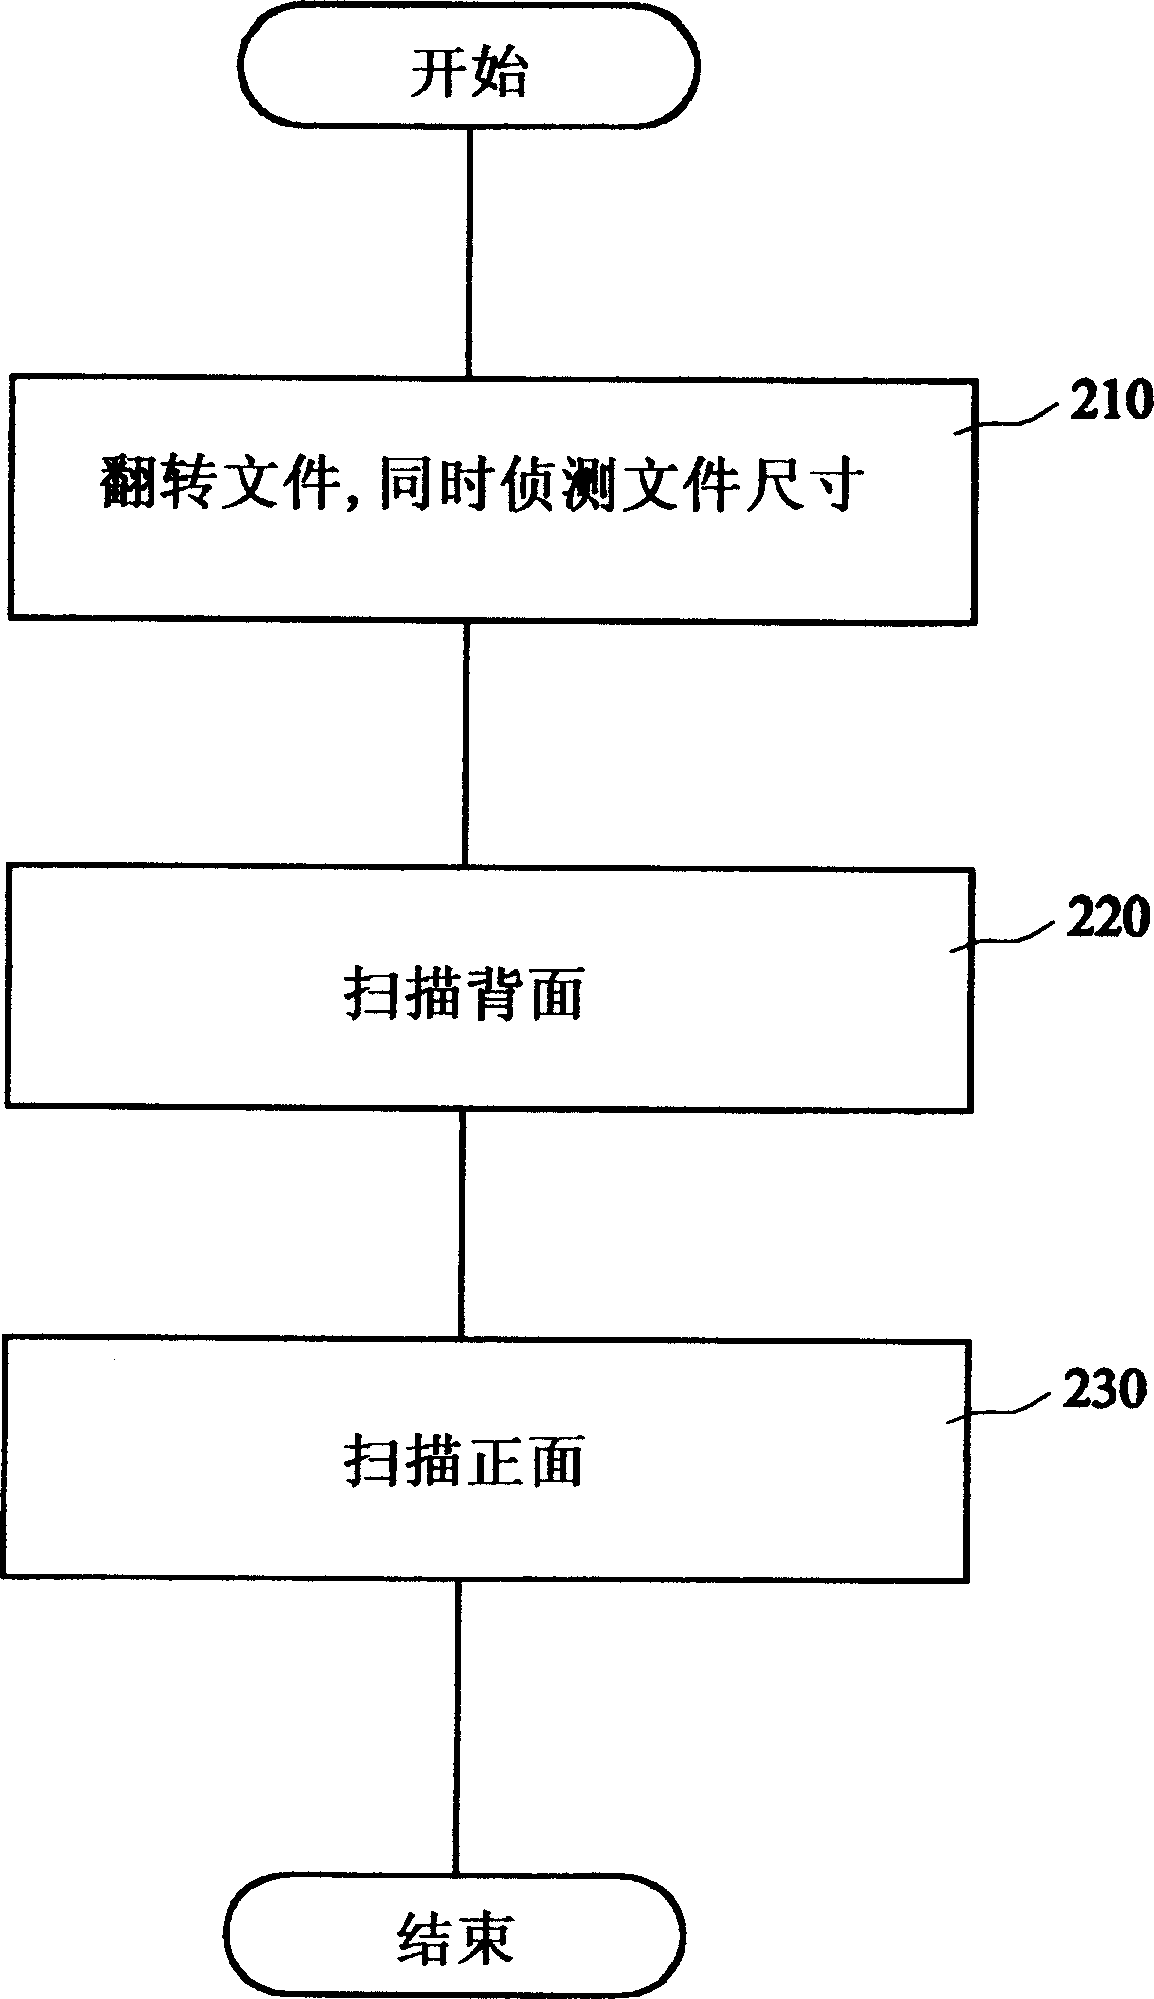 Double-side scanning method capable of fast measuring document's size